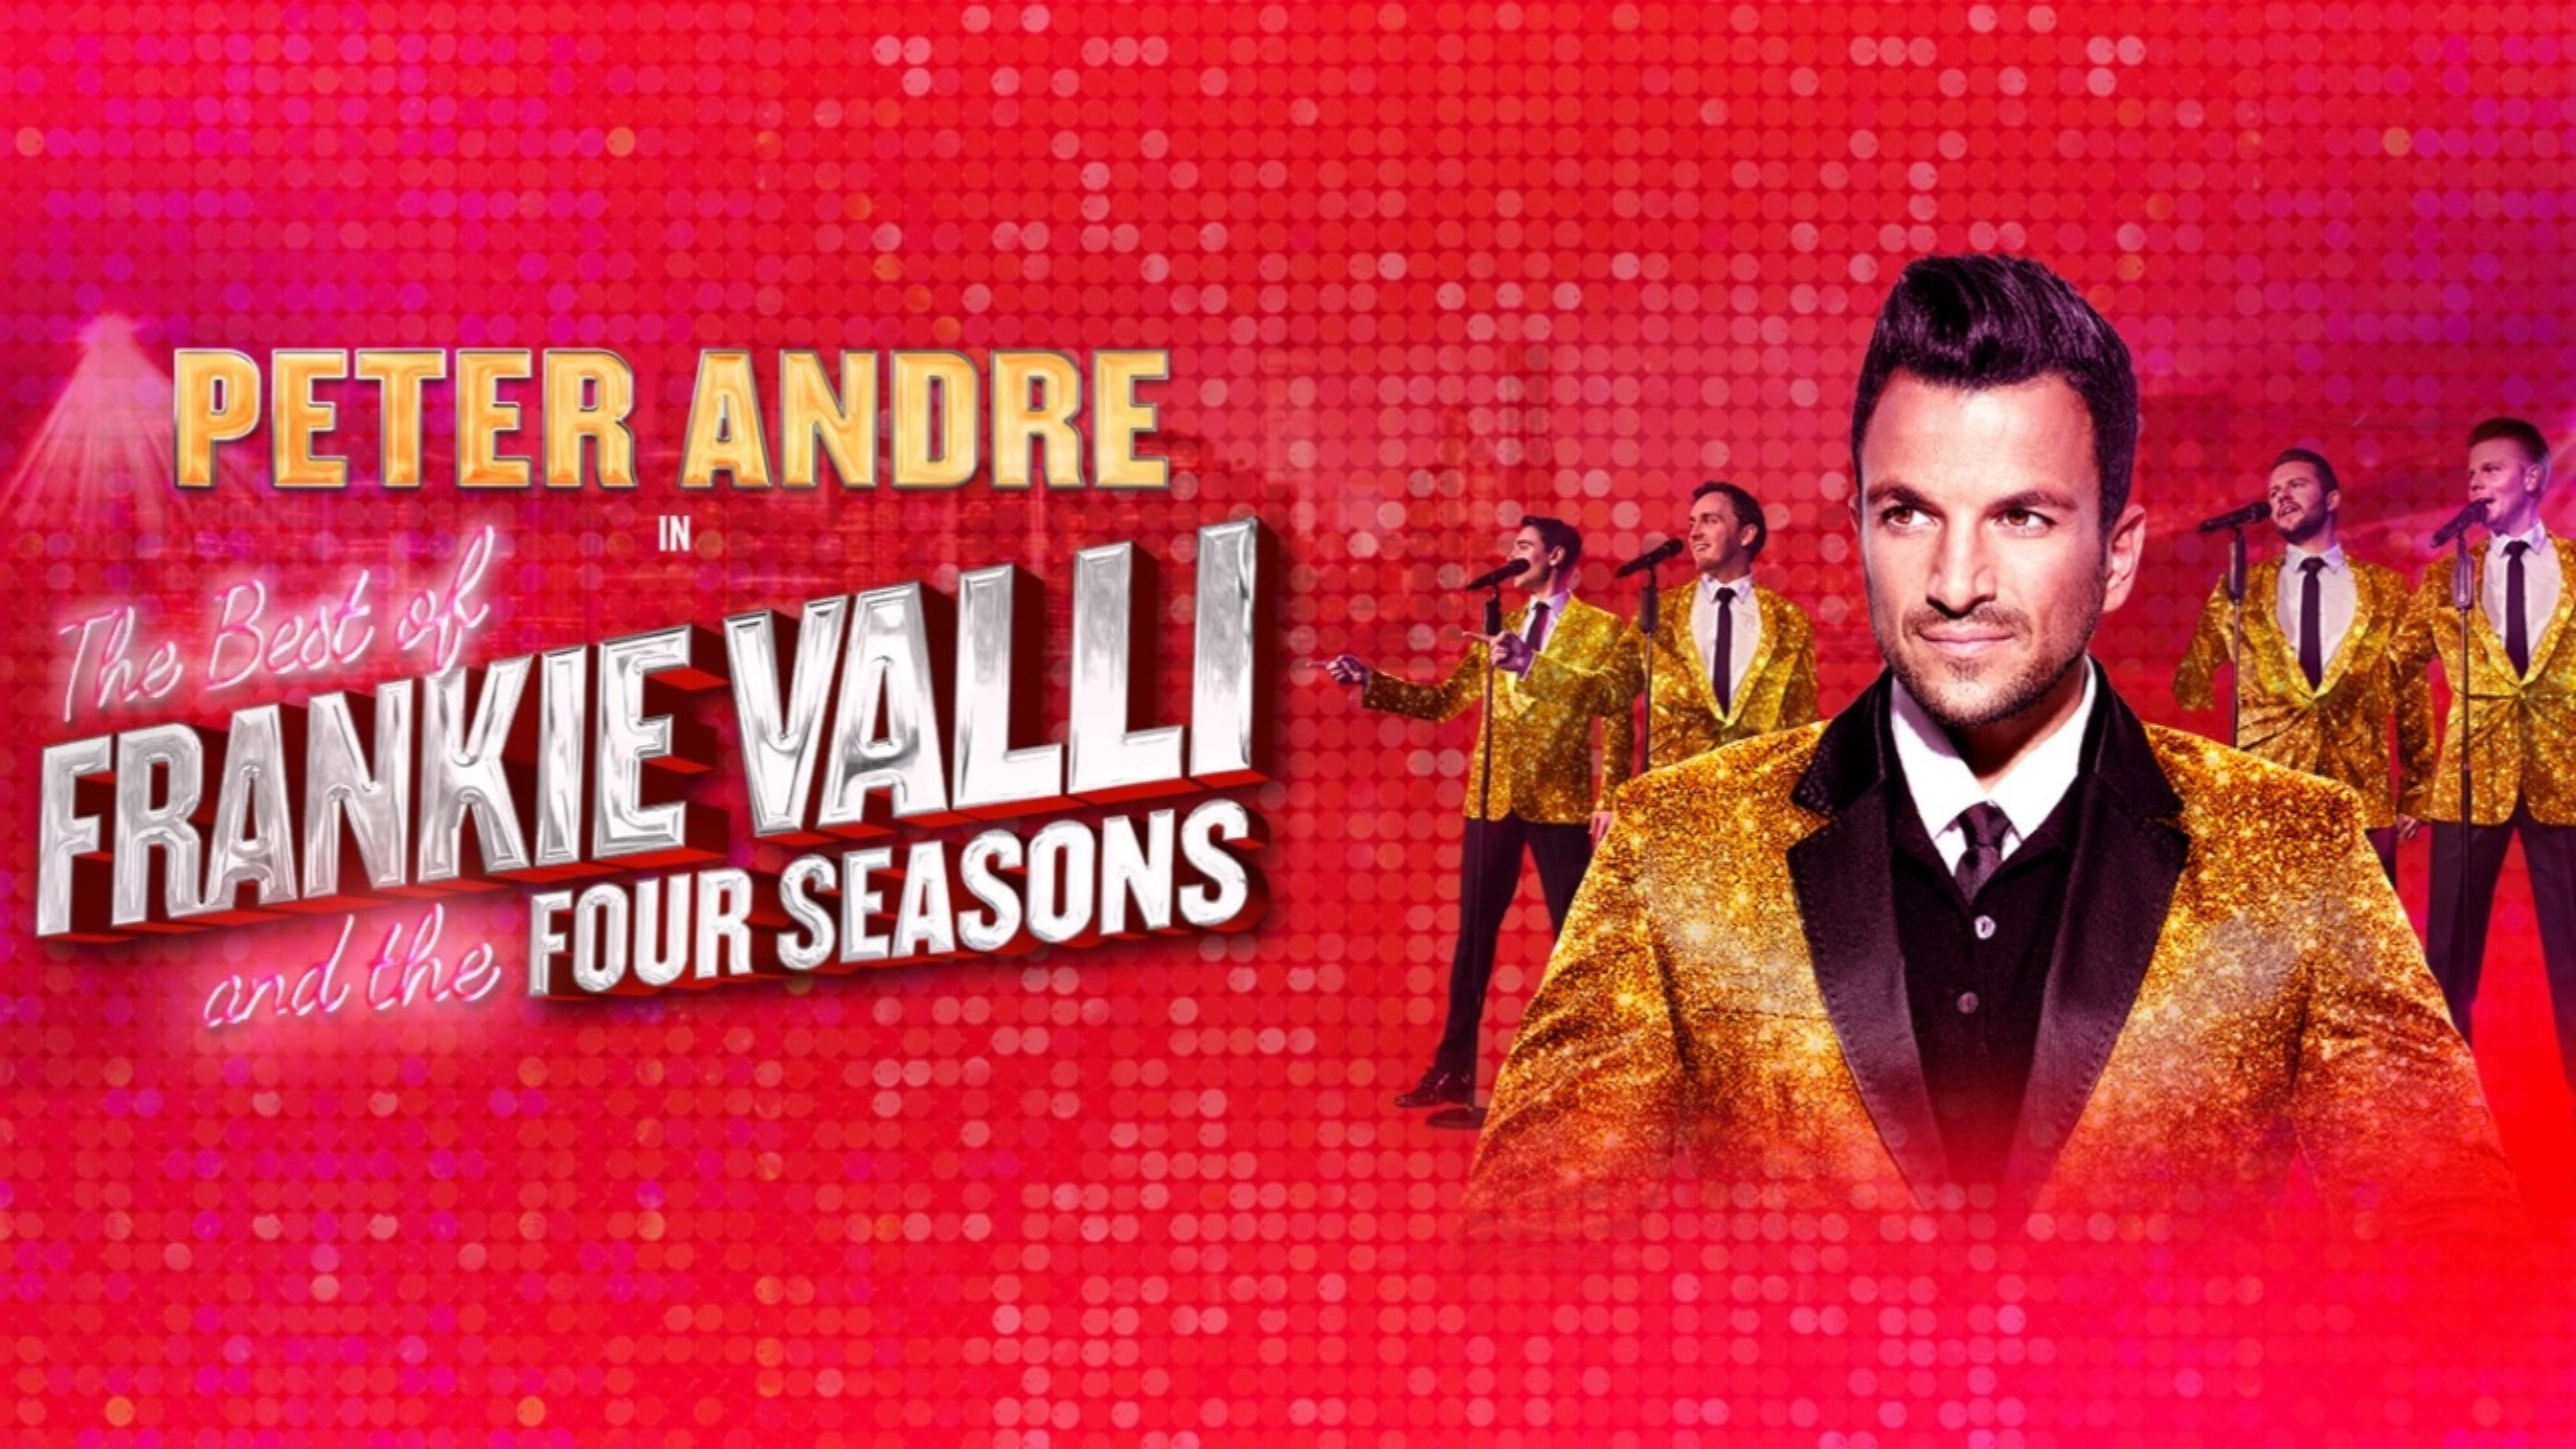 Peter Andre in the Best of Frankie Valli and The Four Seasons